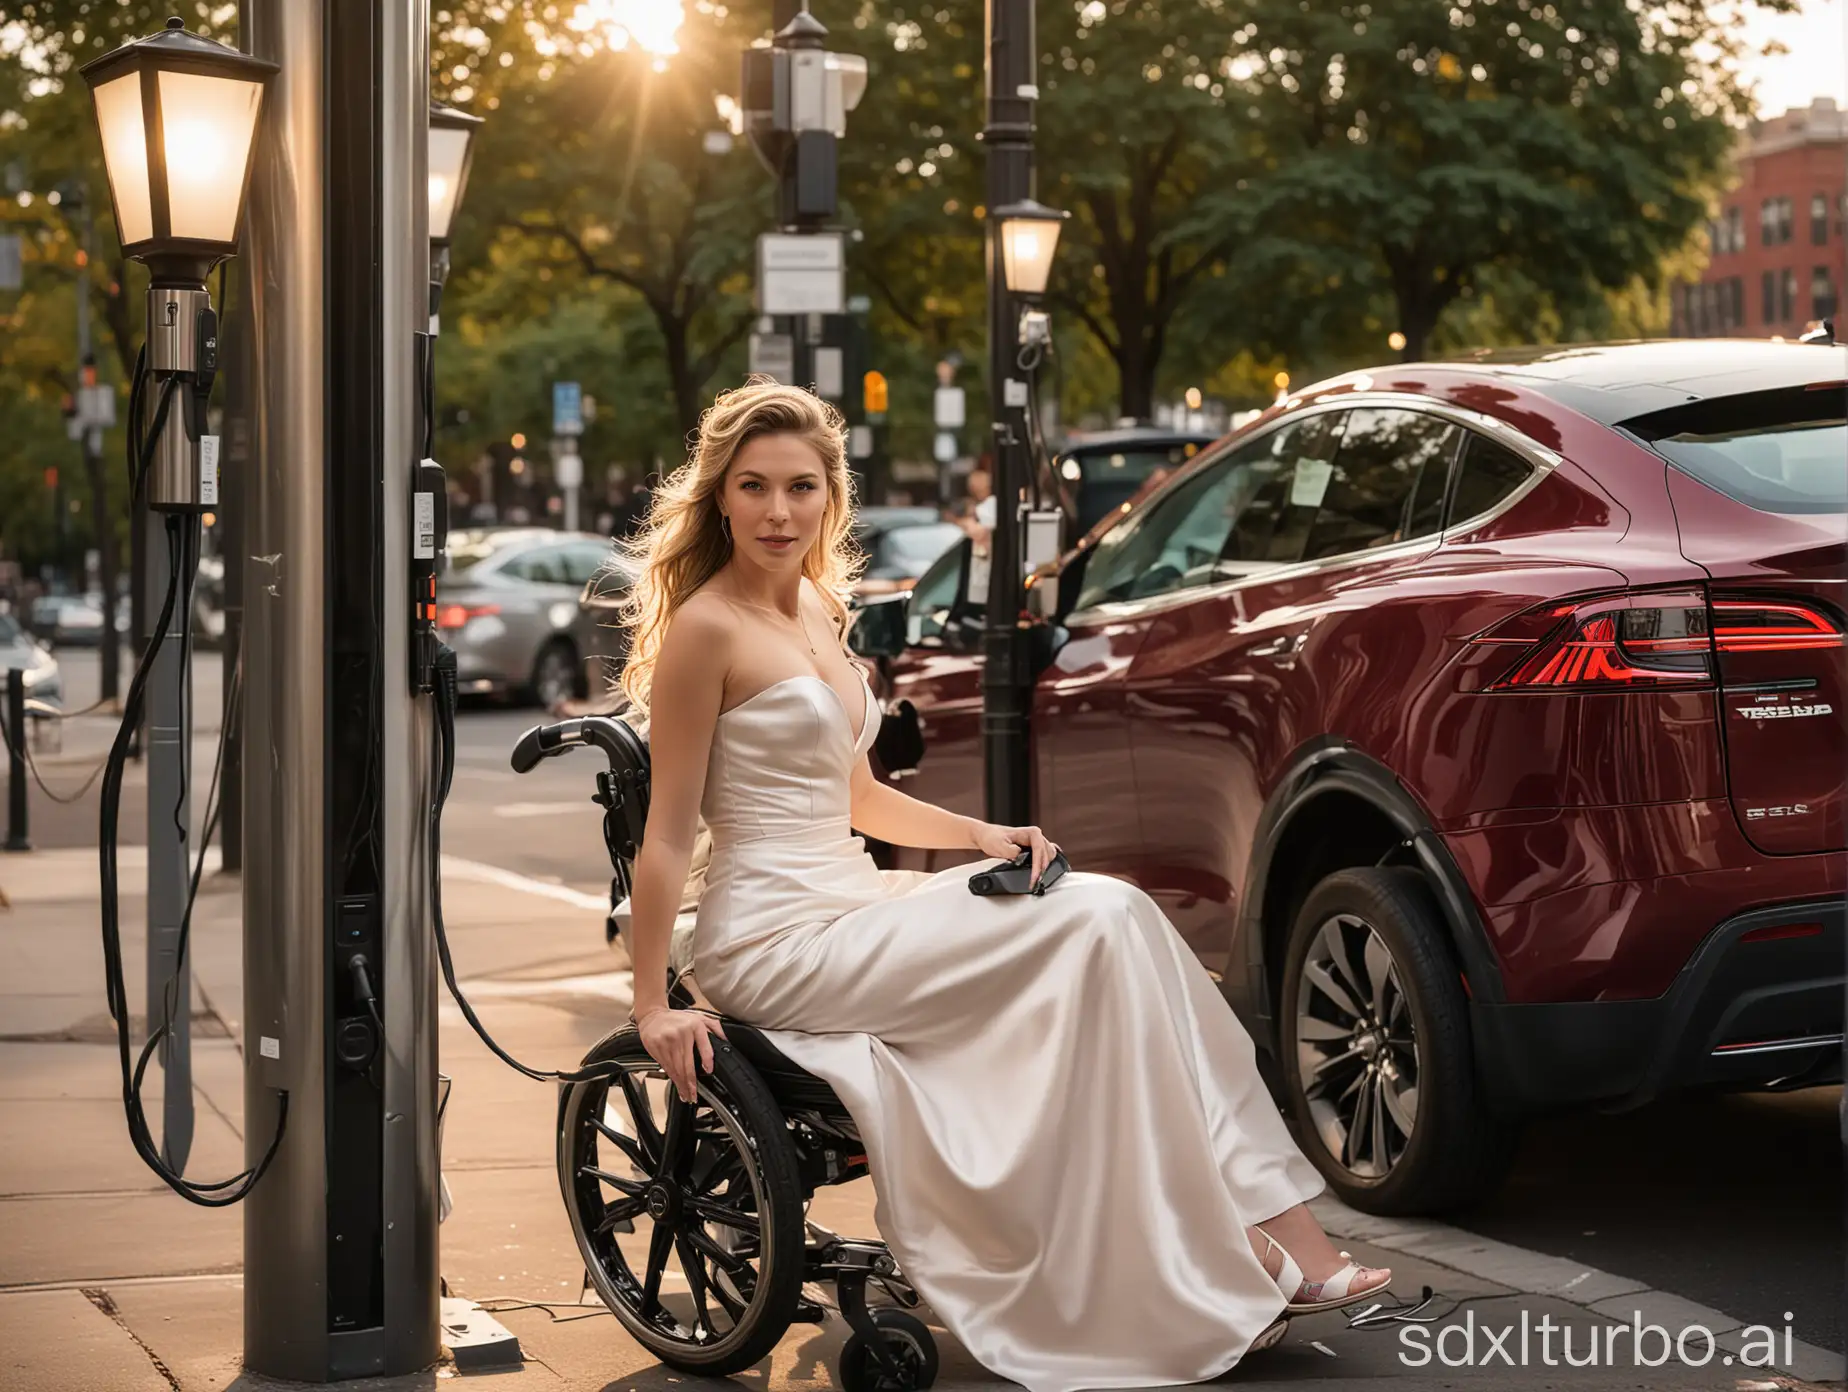 a stunning, beautiful woman sitting in a motorized wheelchair plugs an EV charging cable into a sleek, streetlamp-mounted charging station. Although she is sitting, her formal gala dress looks beautiful and put together. sunset, new york city. bokeh, gorgeous professional candid photography. Her handicap-accessable Tesla is in the background.